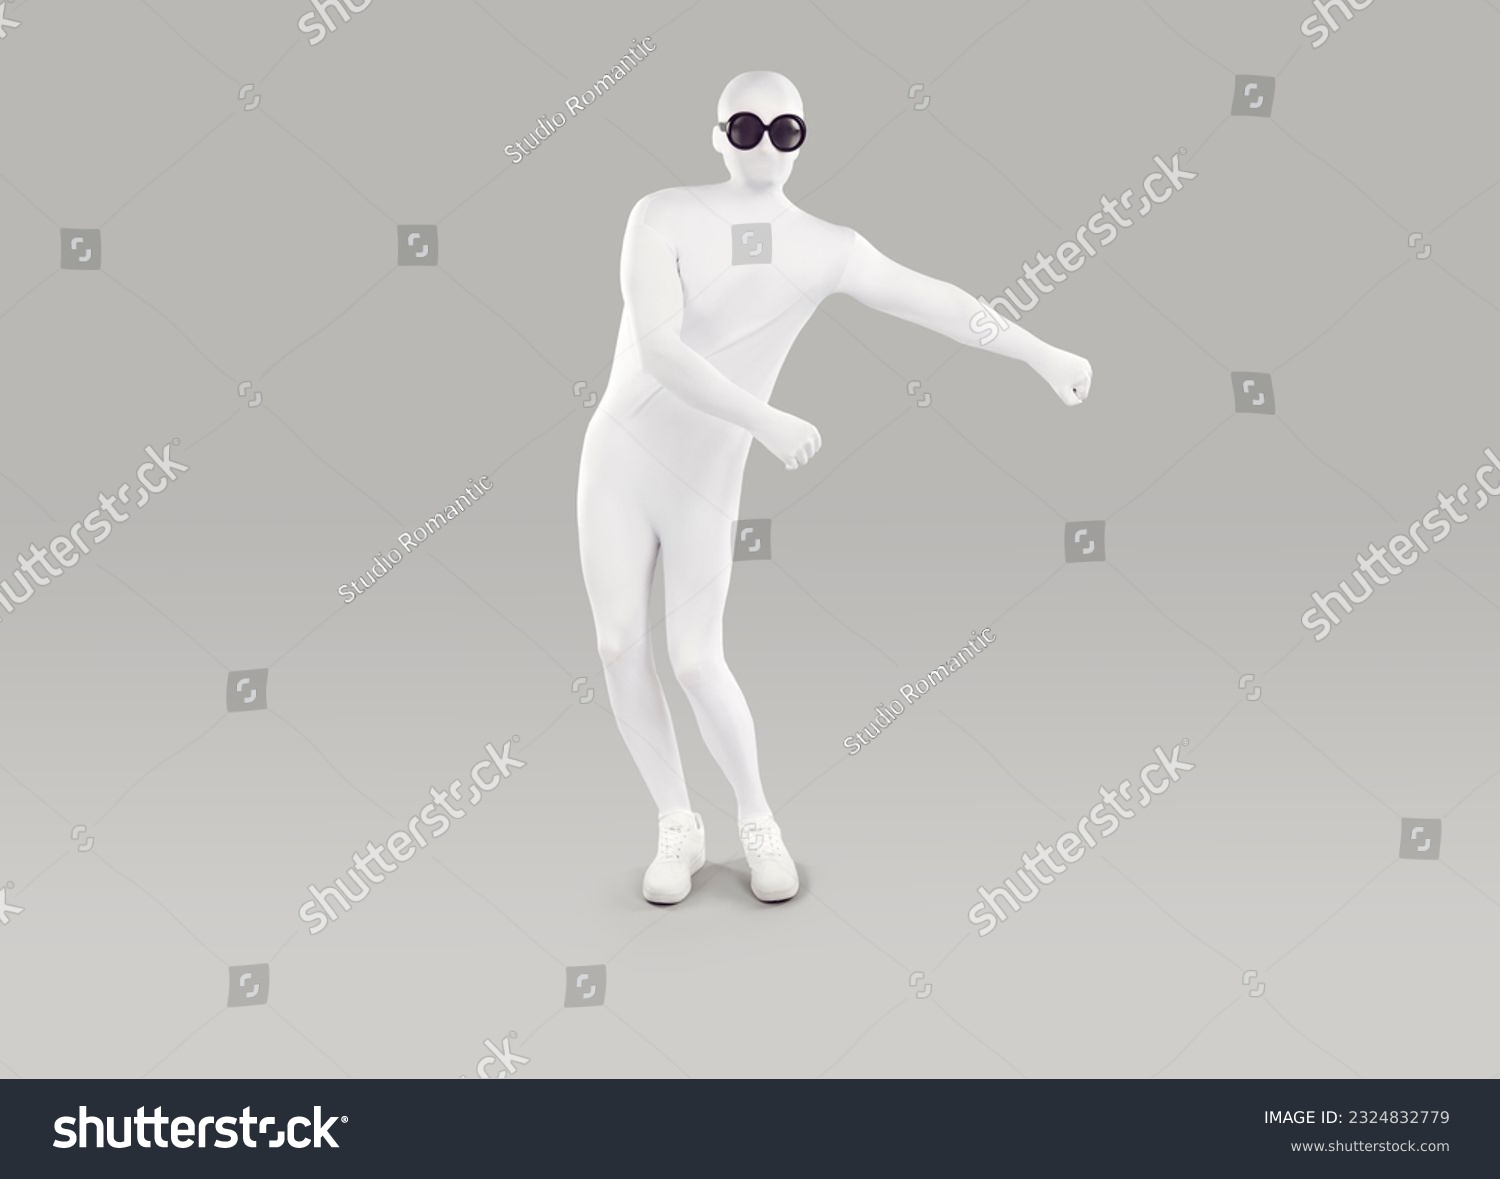 Funny man in bodysuit costume dancing in studio. Full length shot of man disguised in white spandex suit and black round sunglasses doing floss dance isolated on gray background #2324832779